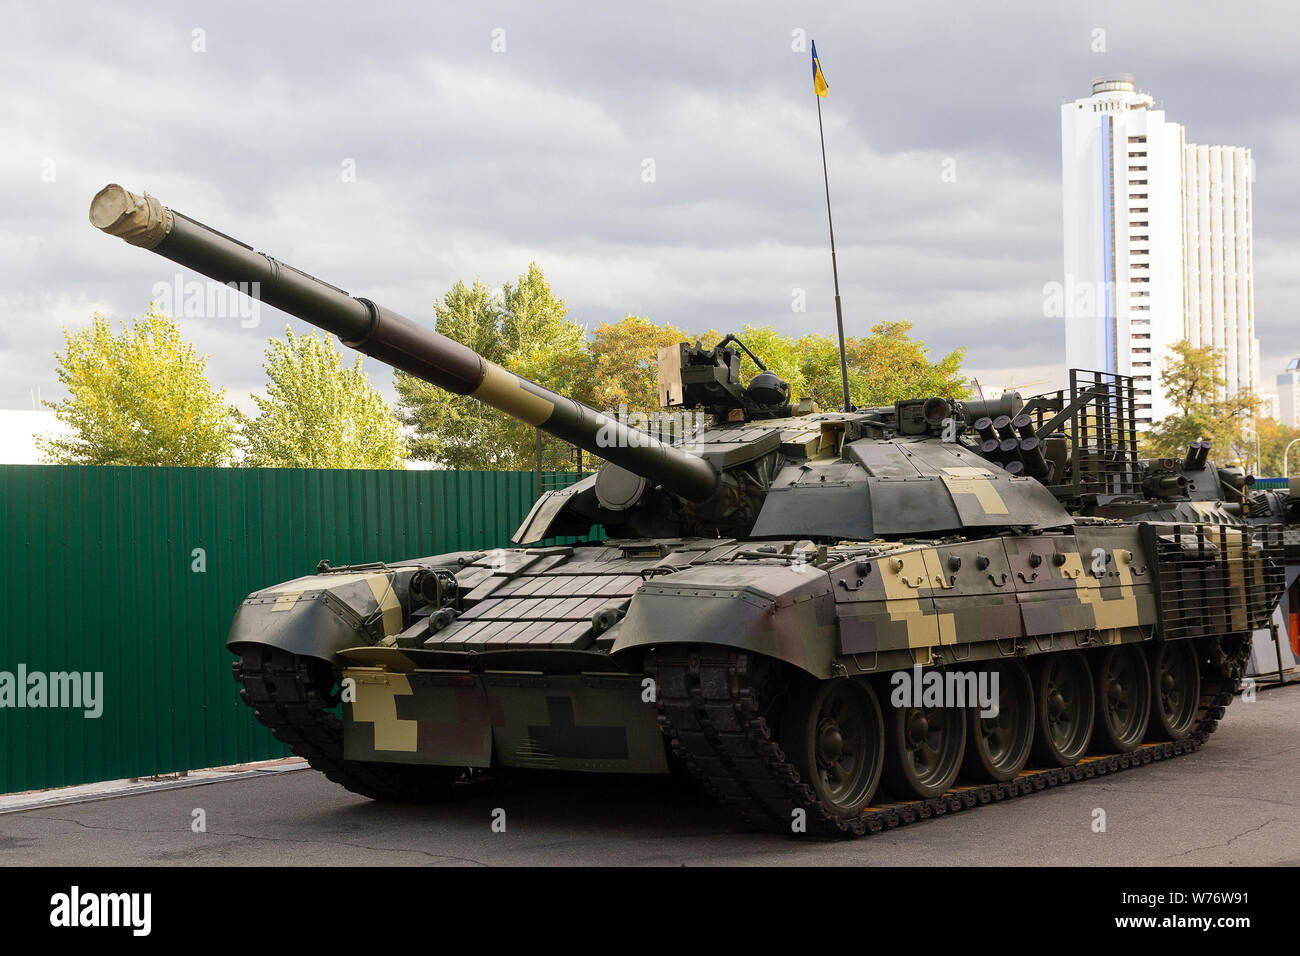 Kiev Ukraine October 13 17 Modernized Tank Of Ukrainian Production At The Exhibition Arms And Security 17 Stock Photo Alamy